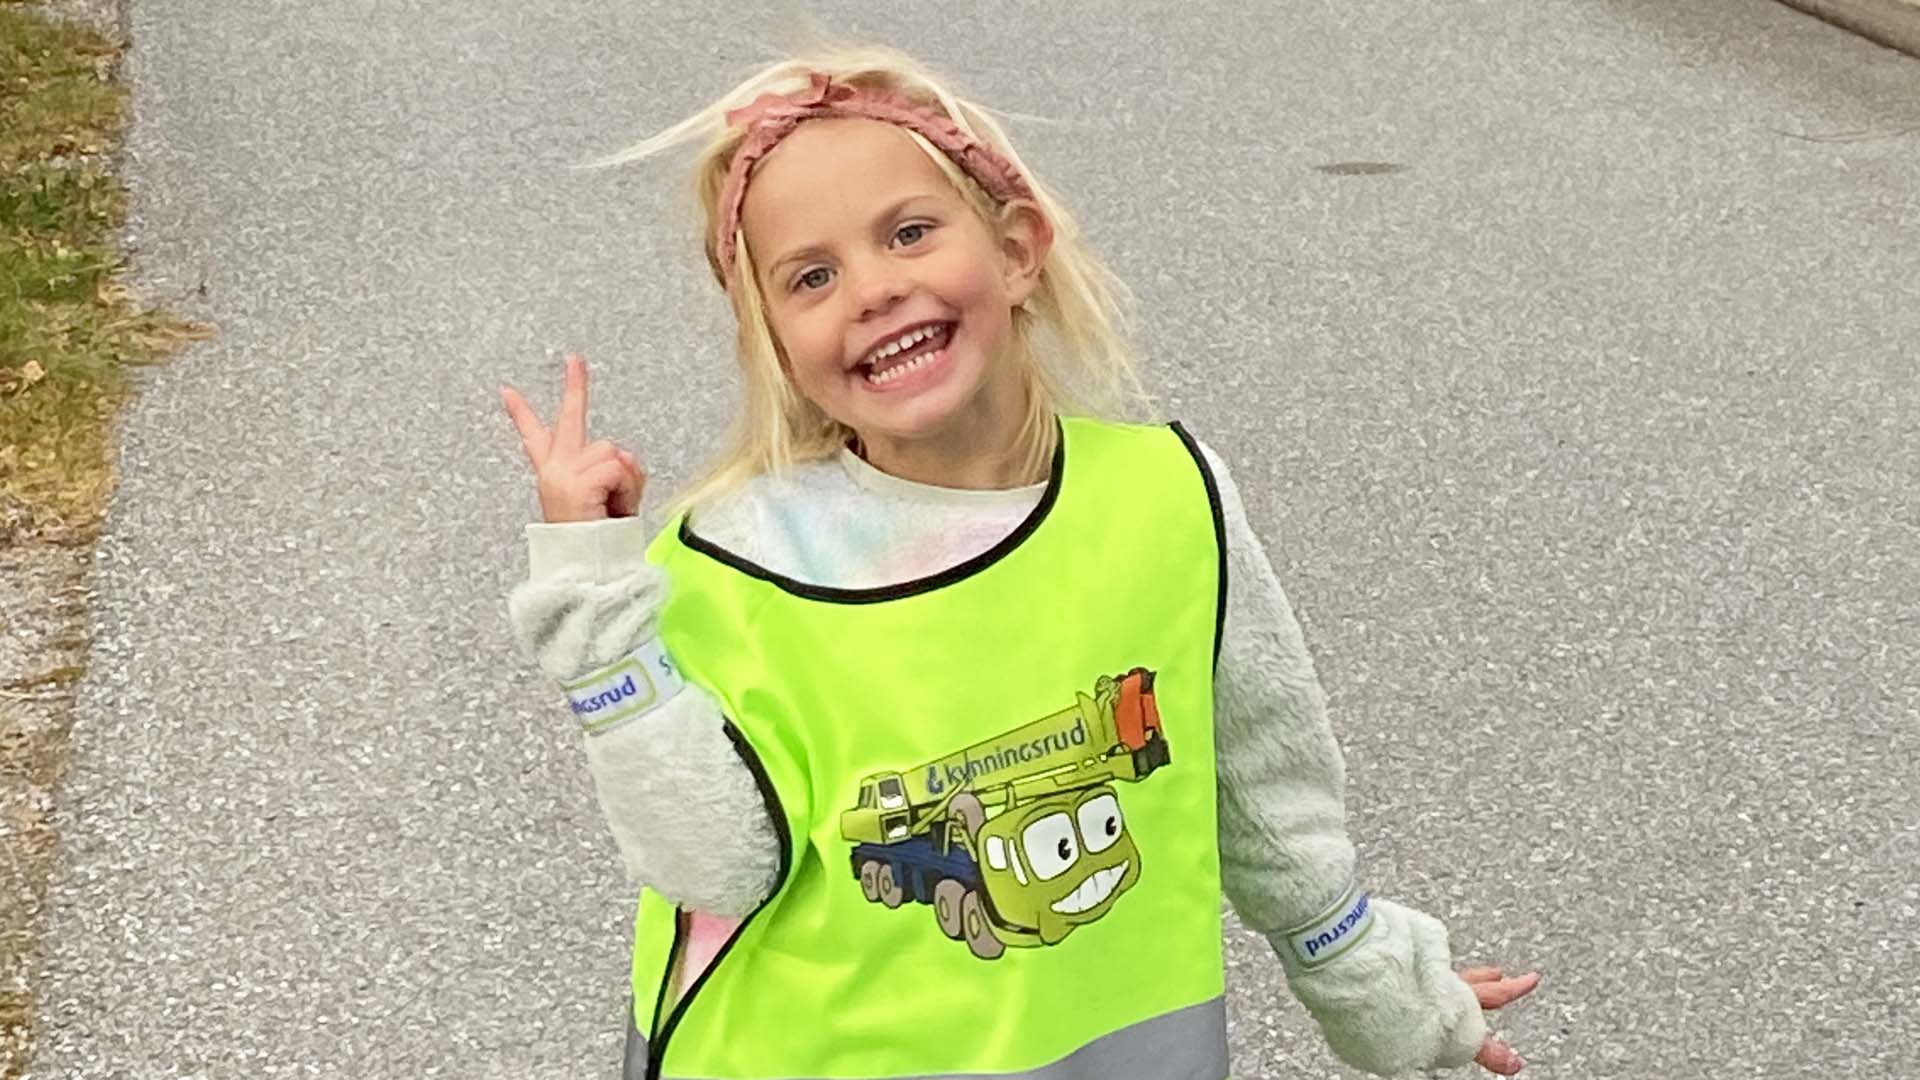 Young smiling girl wearing reflective vest with a green mobile crane on it